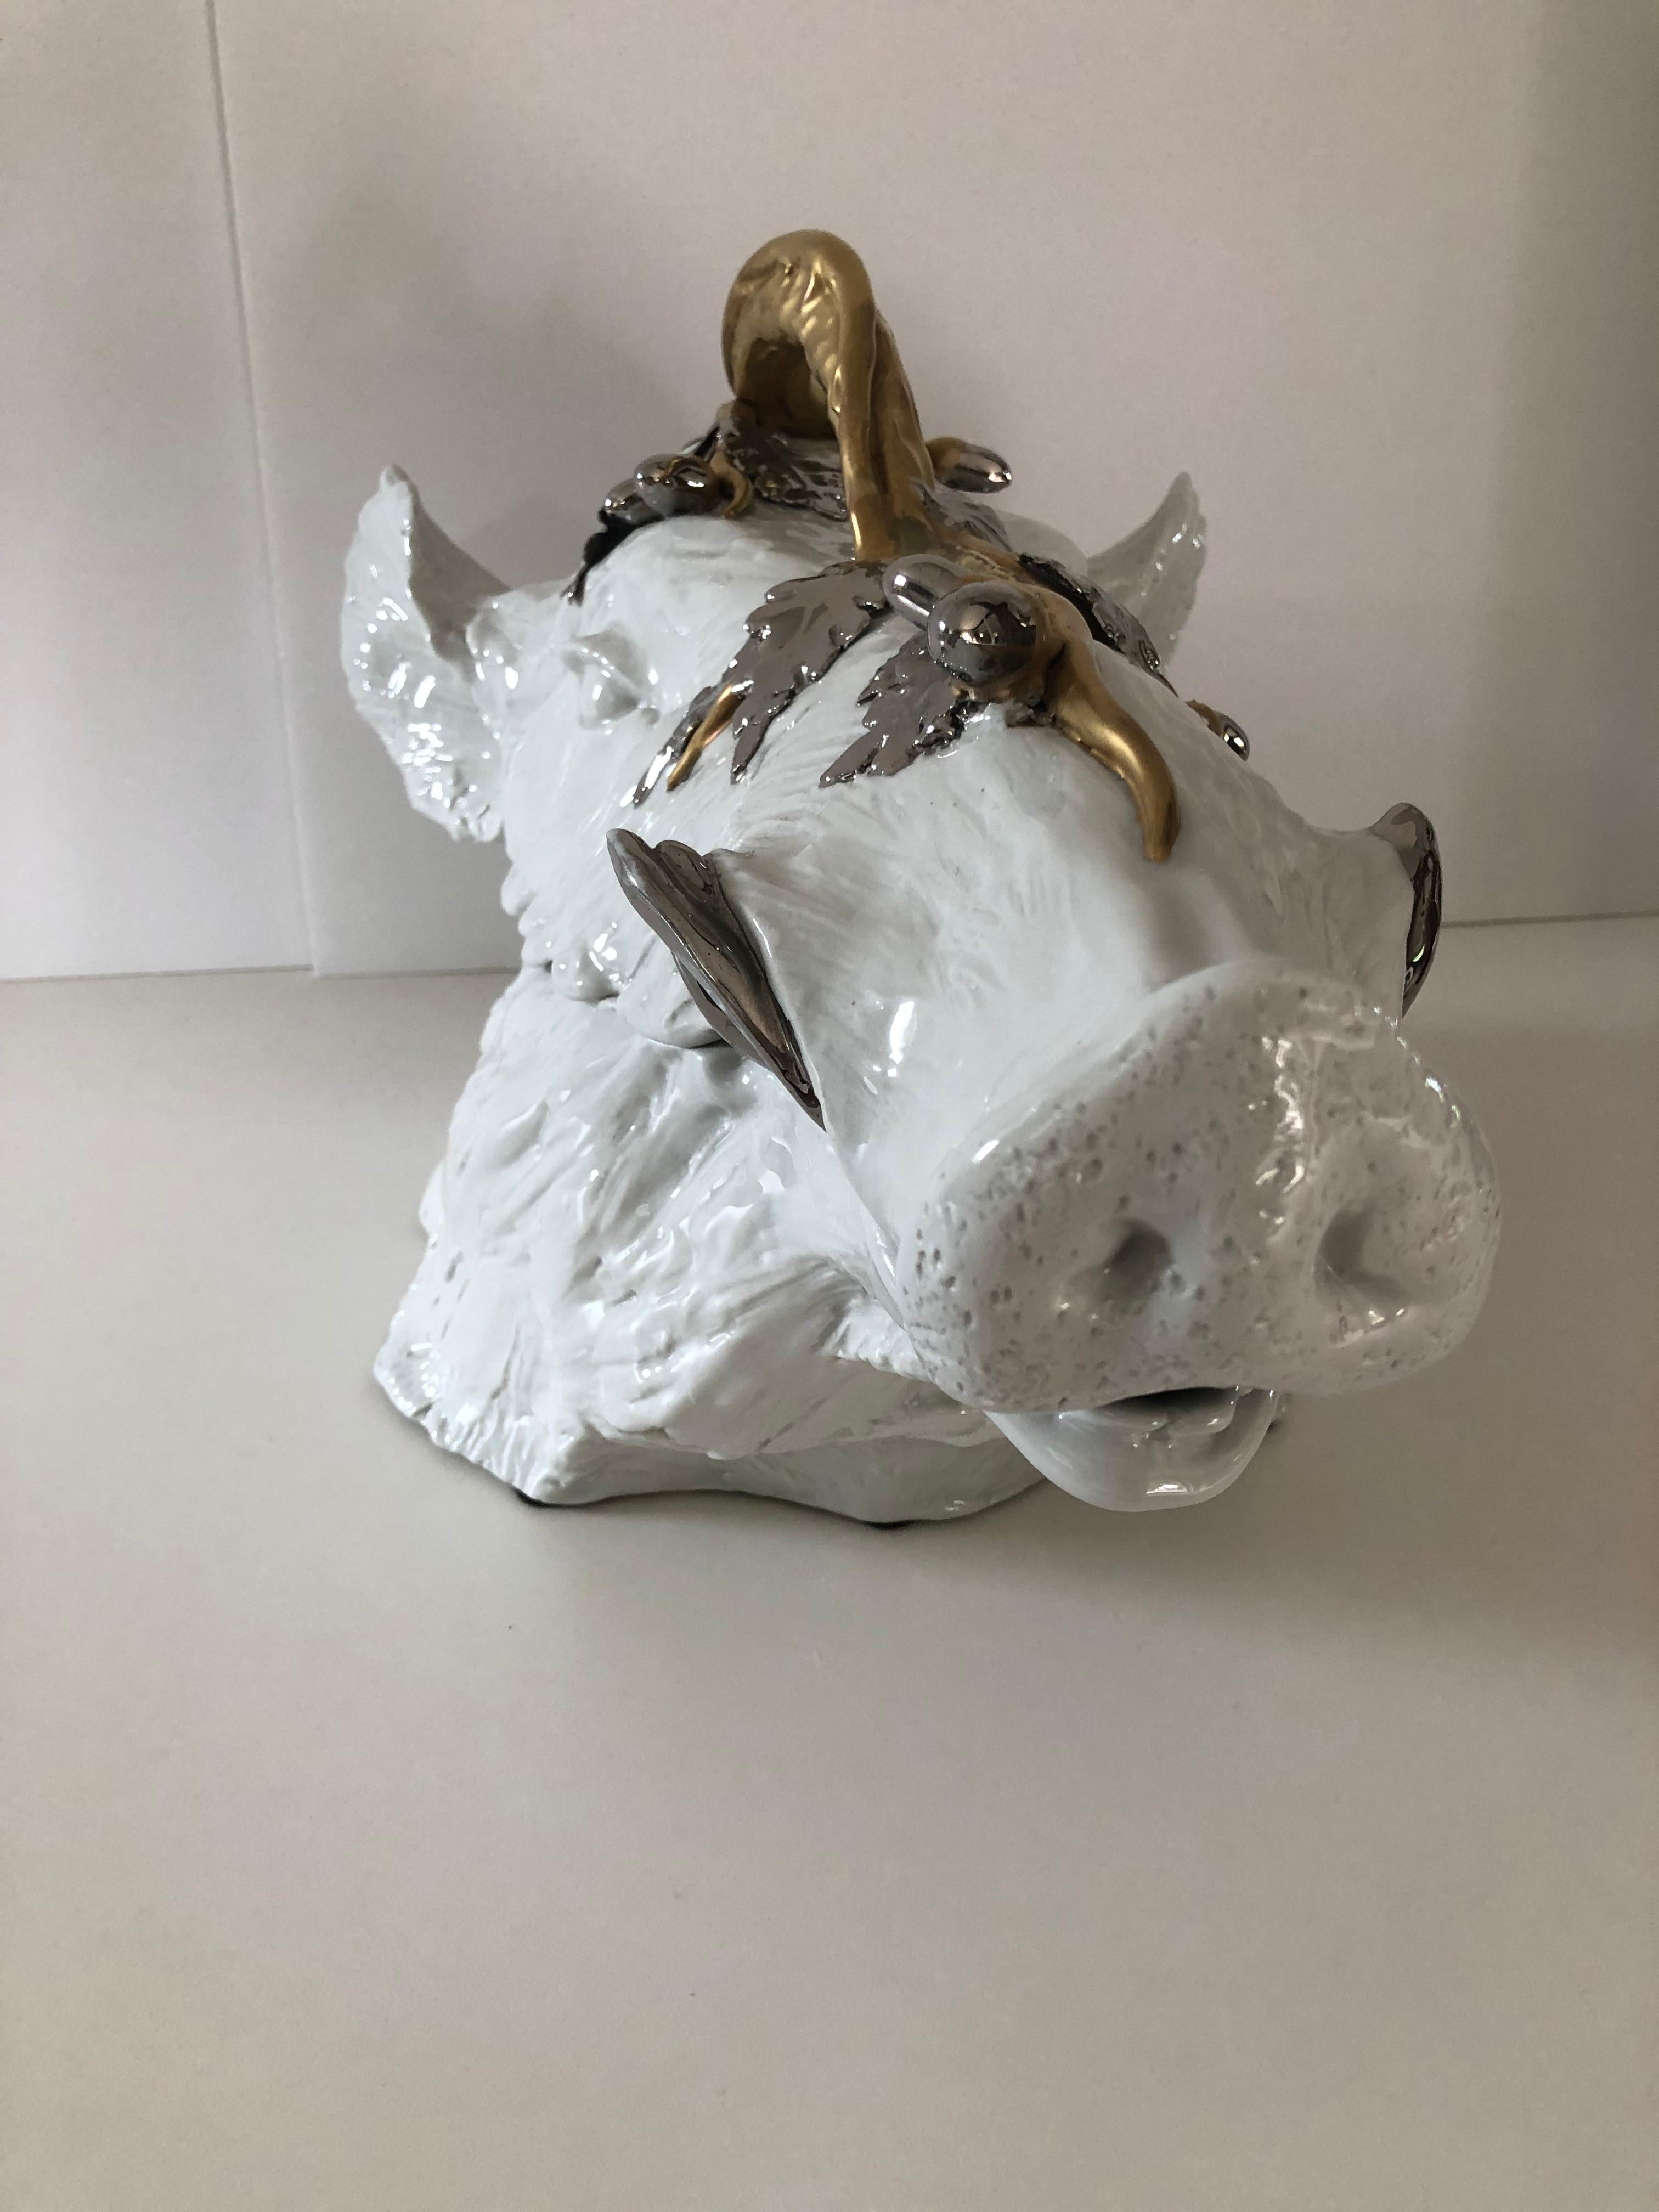 A superb porcelain wild boar tureen designed by Florentine ceramist Giulia Magnani. Magnani is internationally recognized for the exceptional quality of their pieces and exquisite designs. This stunning piece is white porcelain with a bold use of